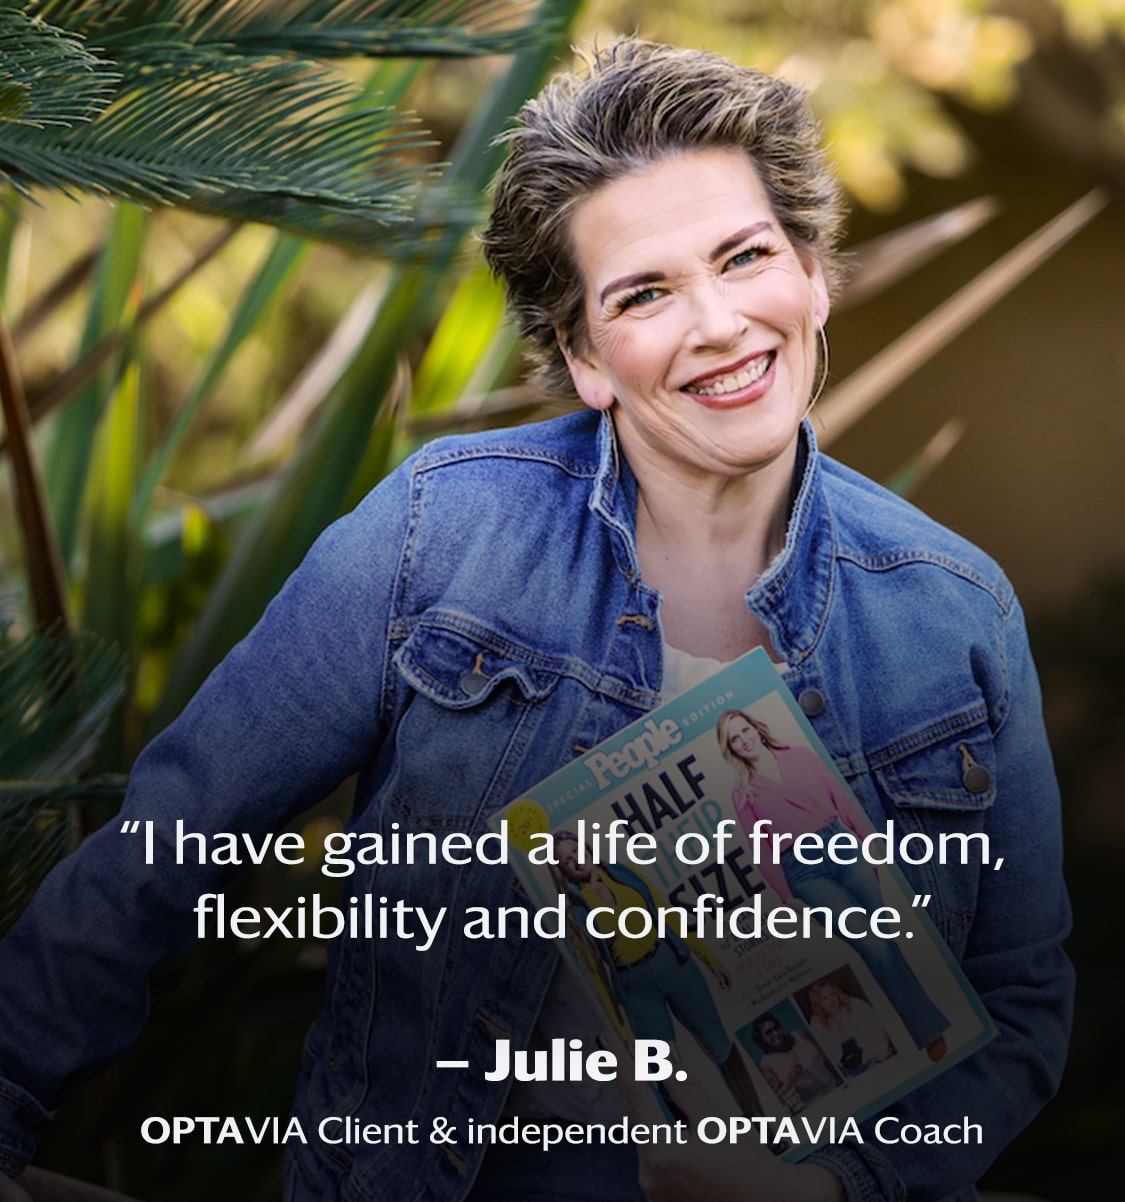 I have gained a life of freedom, flexibility, and confidence. Julie B., Optavia Client and Independent Optavia Coach.